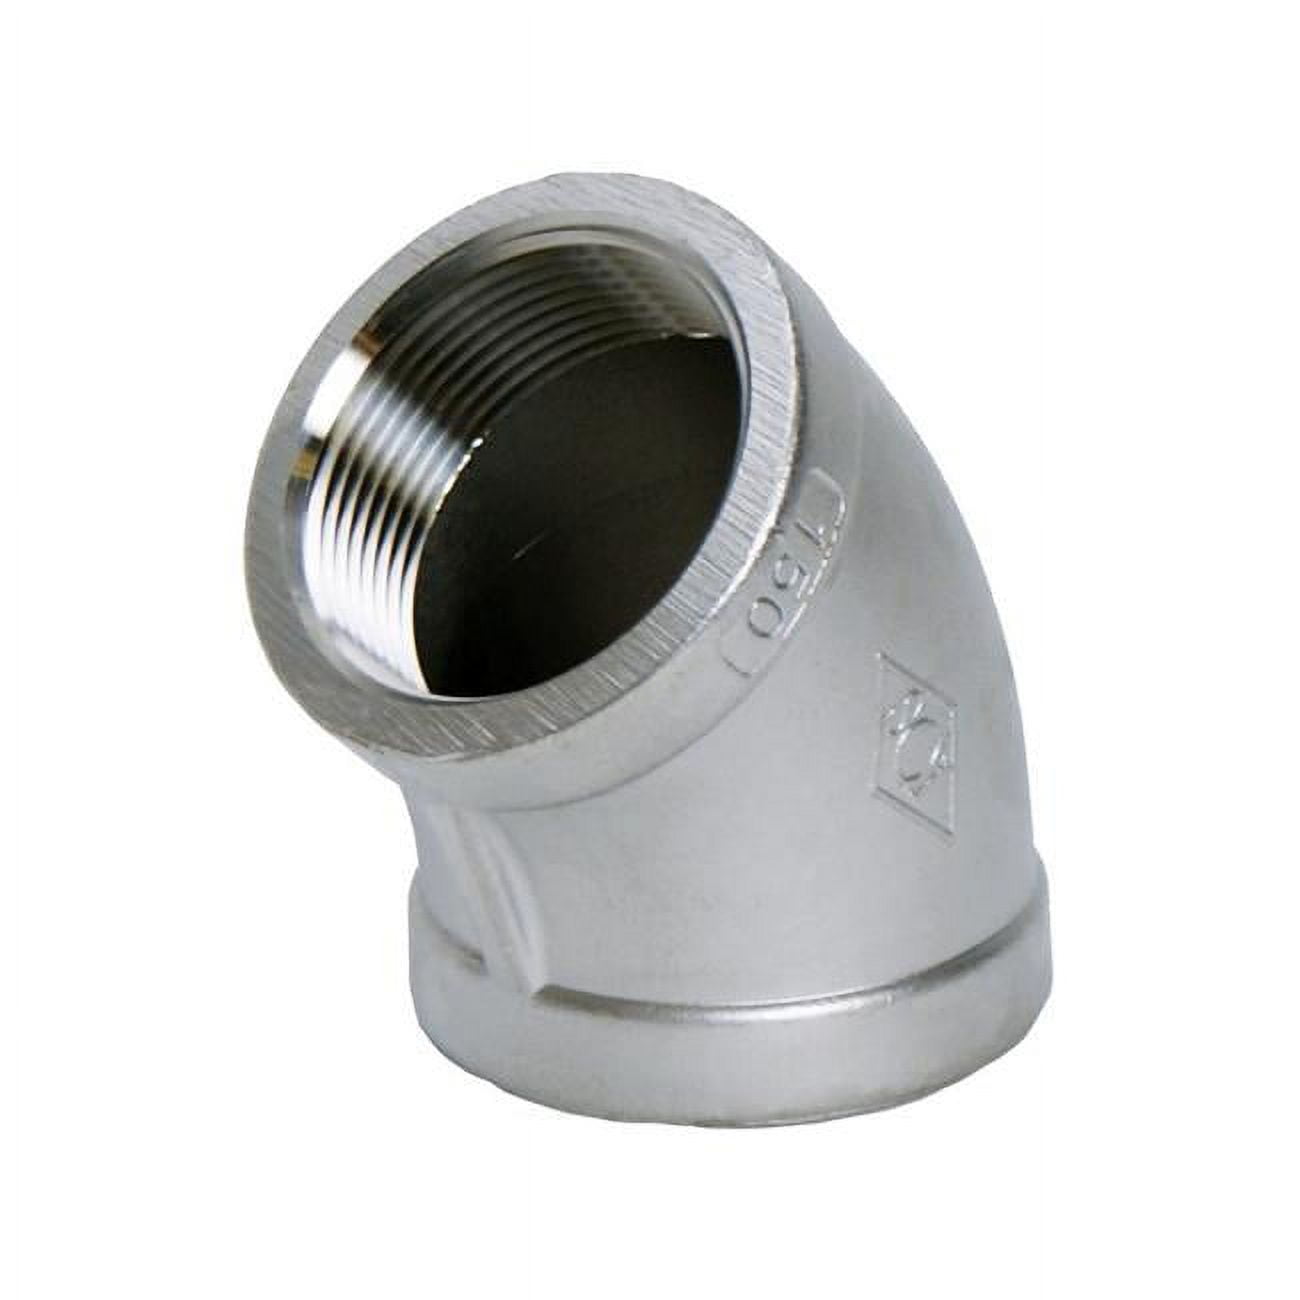 4809901 1.25 In. Thread Stainless Steel 45 Degree Elbow